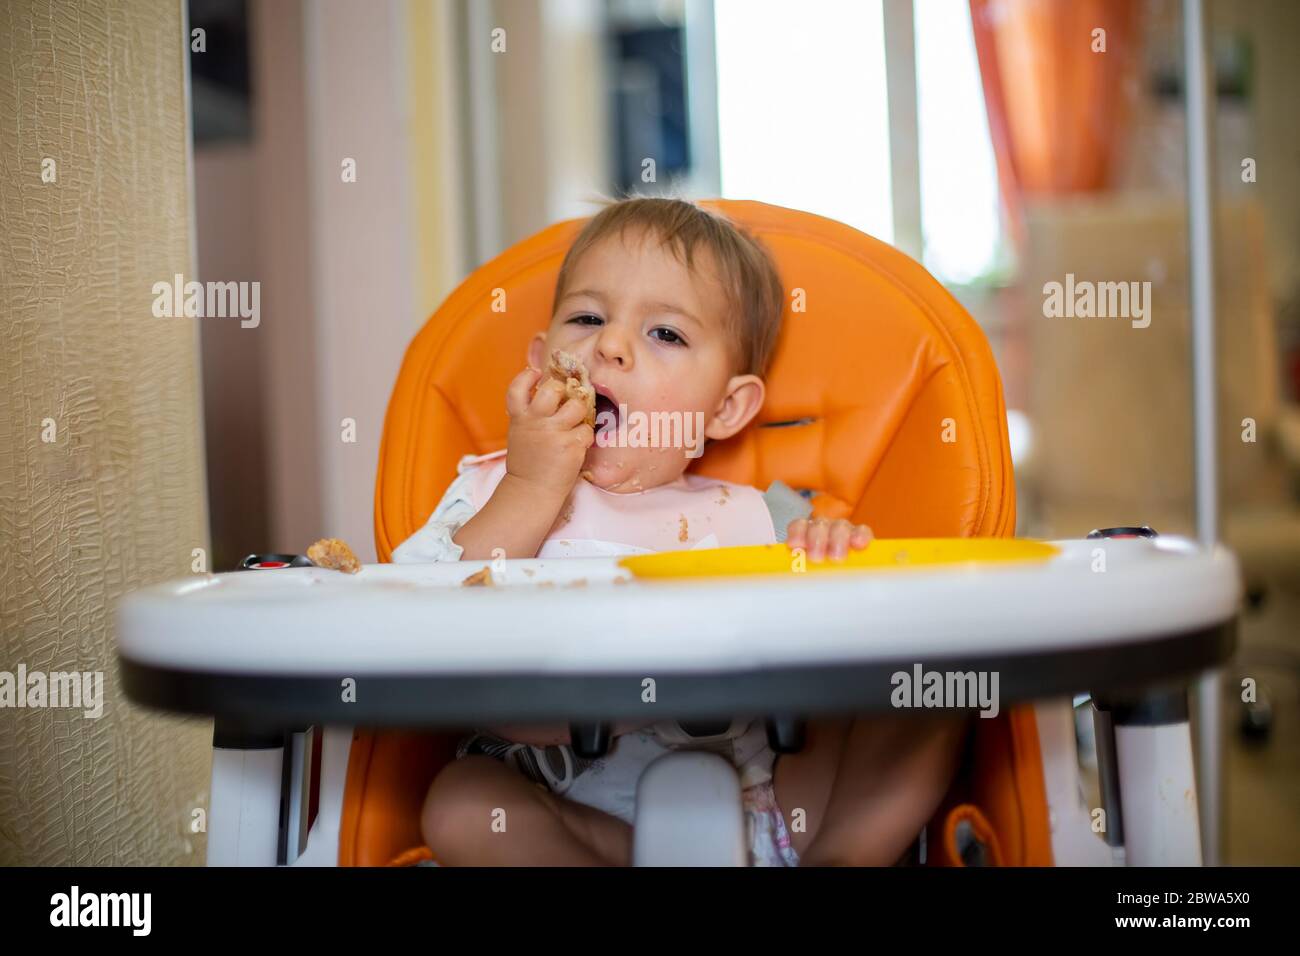 Cute Caucasian baby sitting in an orange baby chair eating a pie with his hands from an orange plastic plate and looking at the camera. close-up Stock Photo